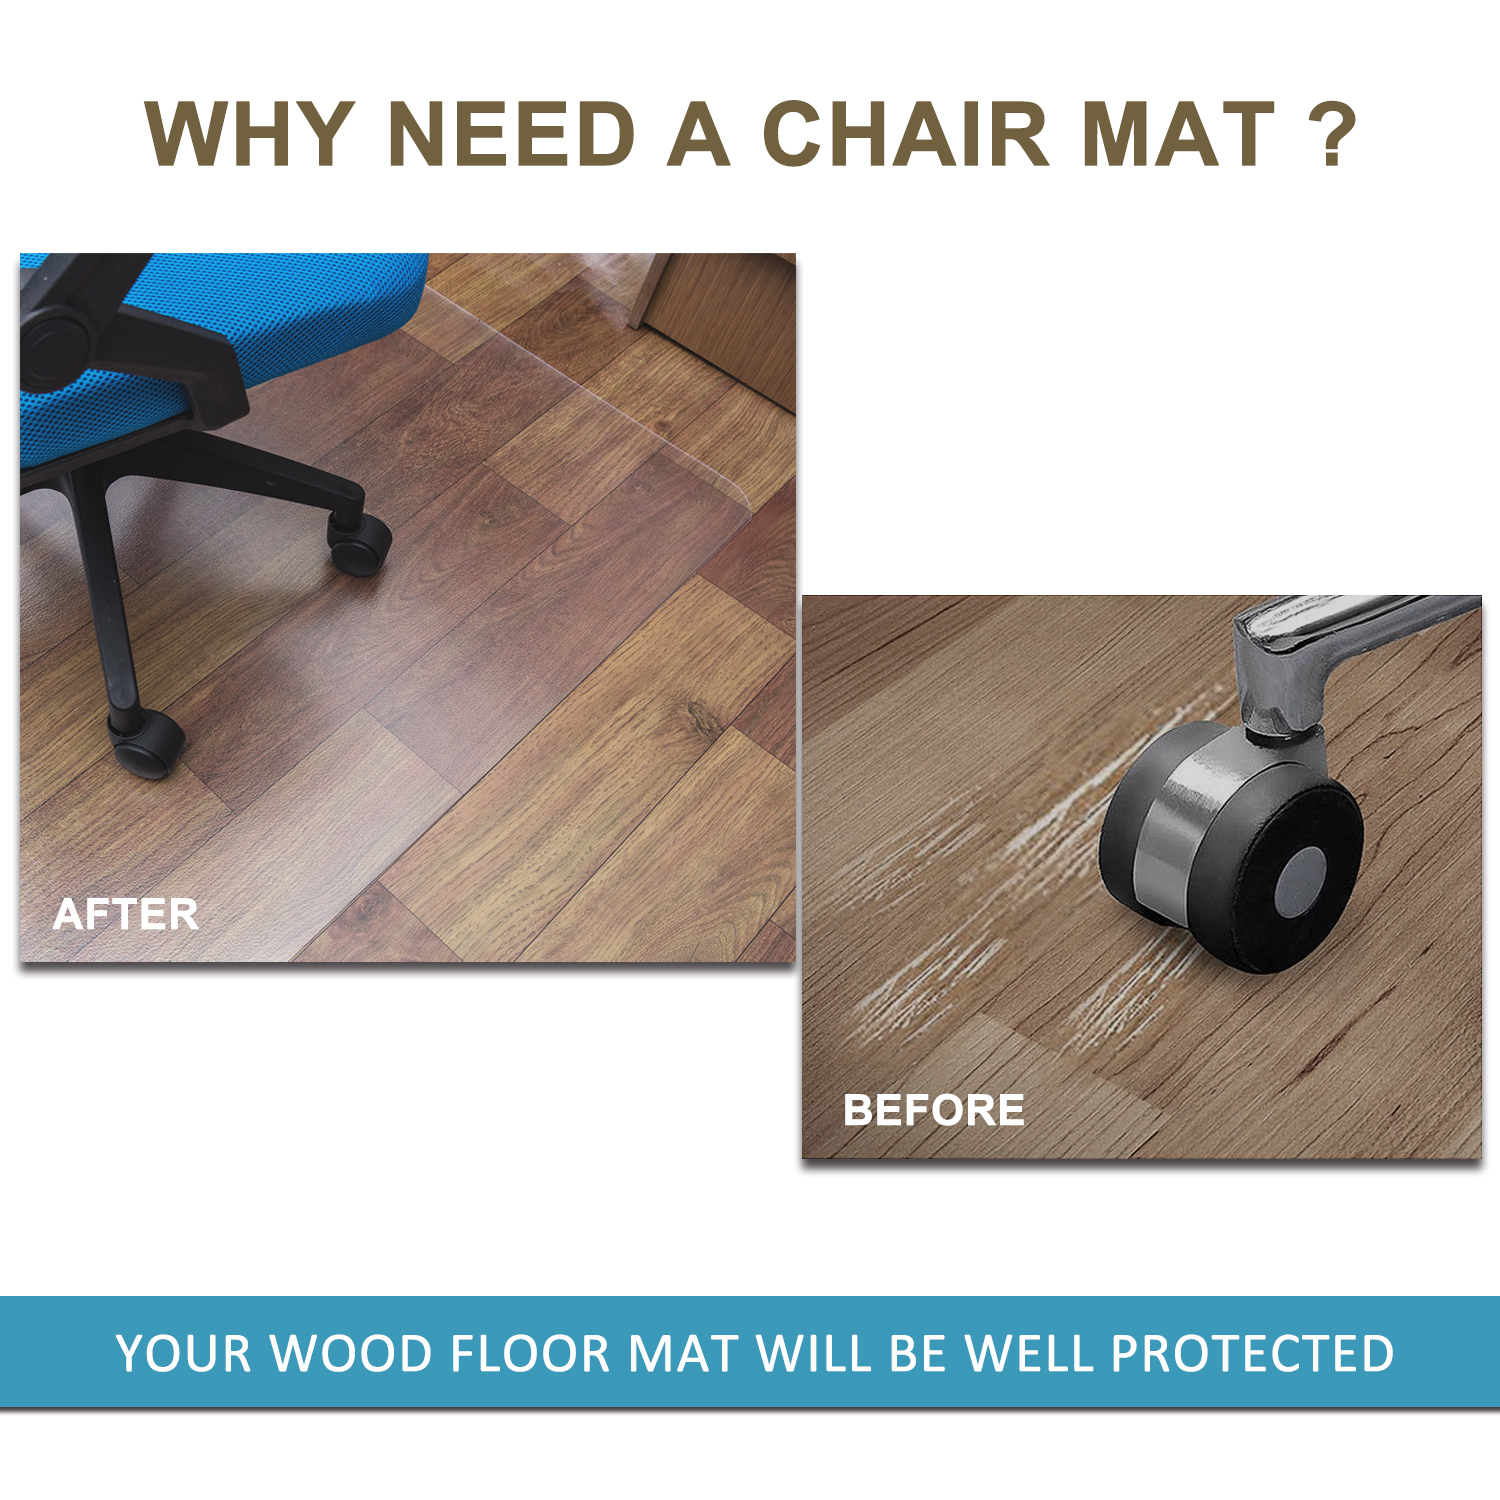 Why need a chair mat